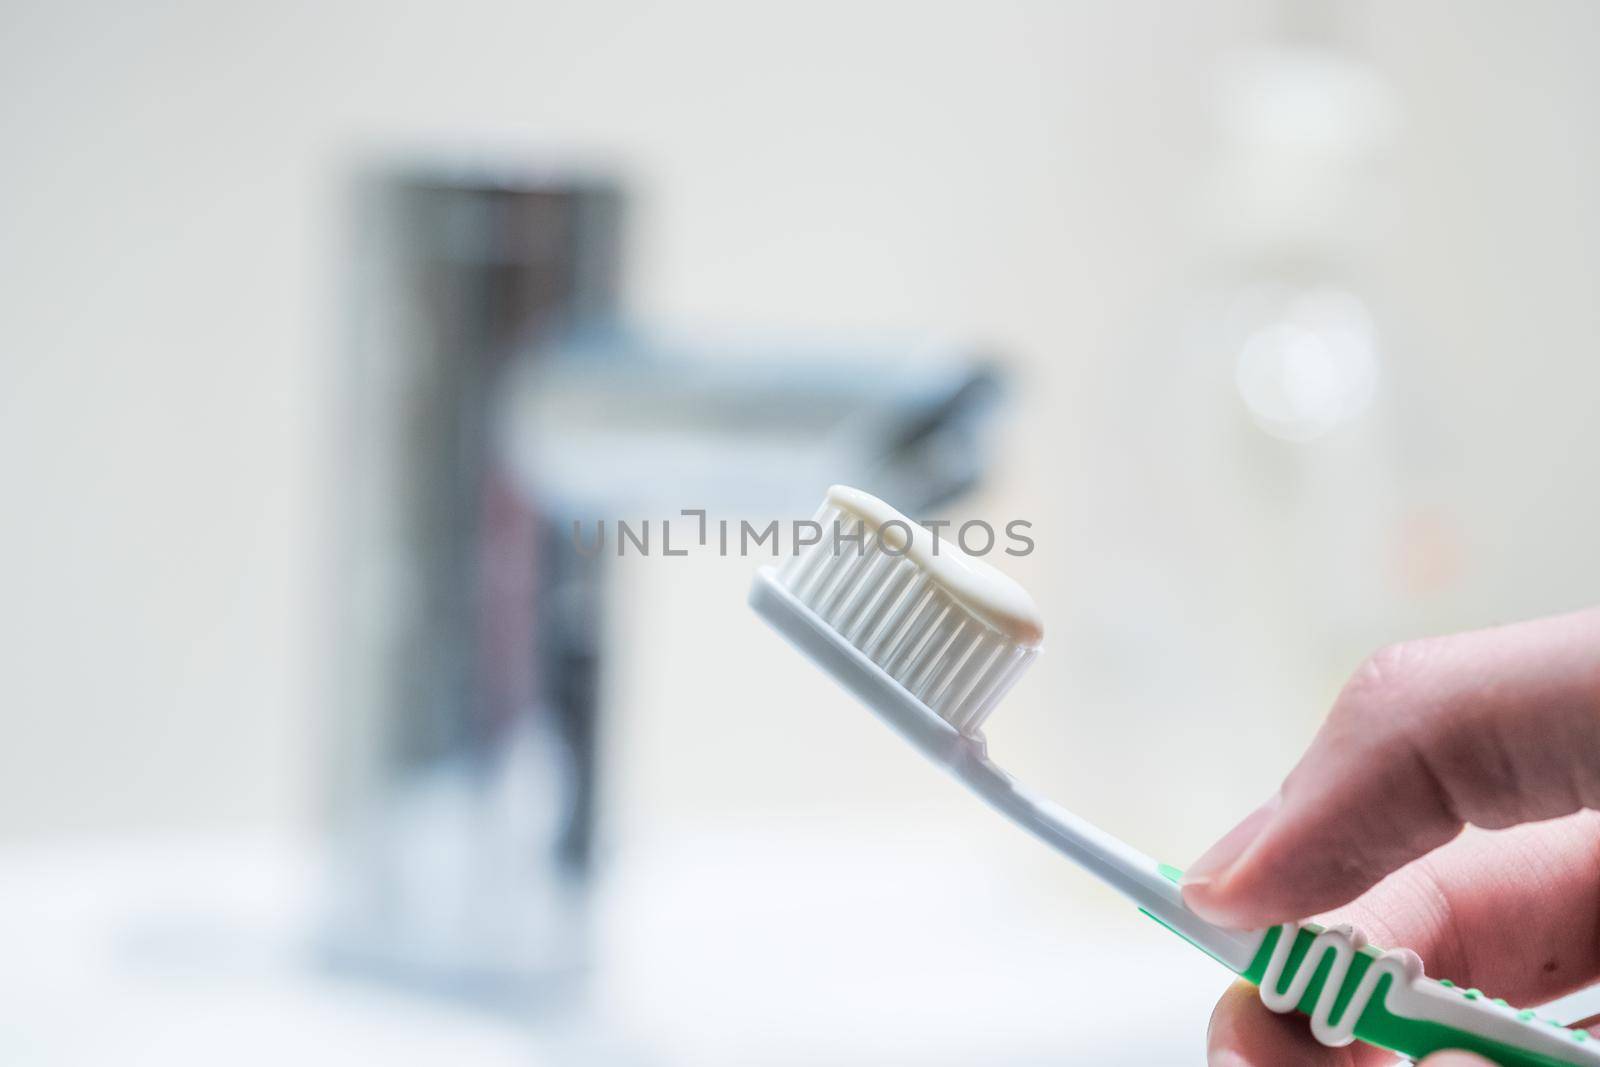 Colorful toothbrush in the bathroom, morning routine